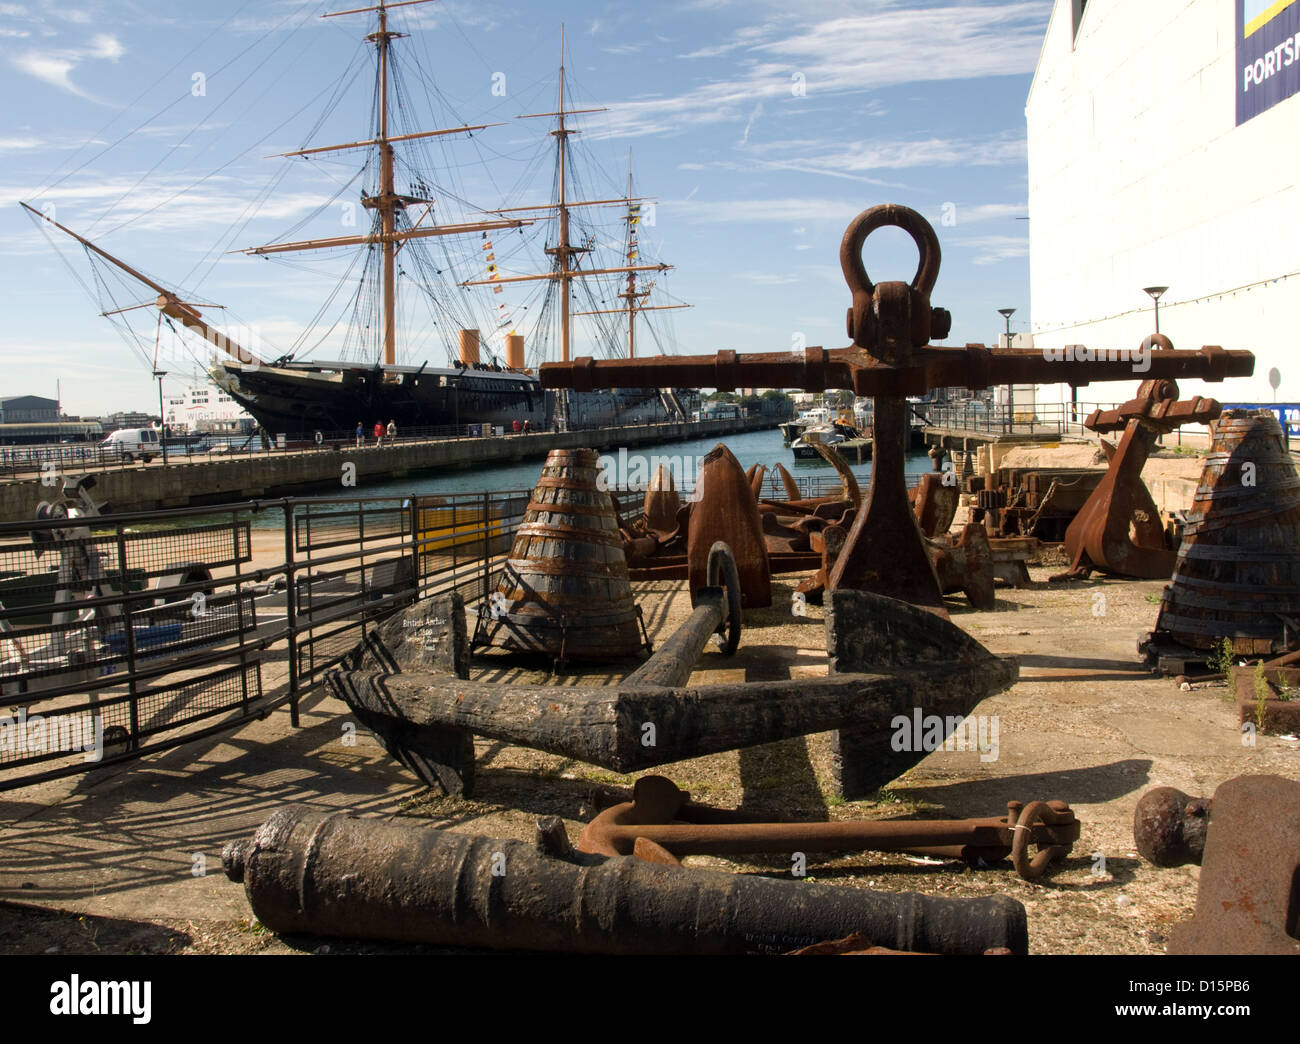 HAMPSHIRE; PORTSMOUTH; NAVAL DOCKYARD; 19TH CENTURY WARSHIP ANCHORS & GEAR WITH H.M.S VICTORY IN BACKGROUND Stock Photo